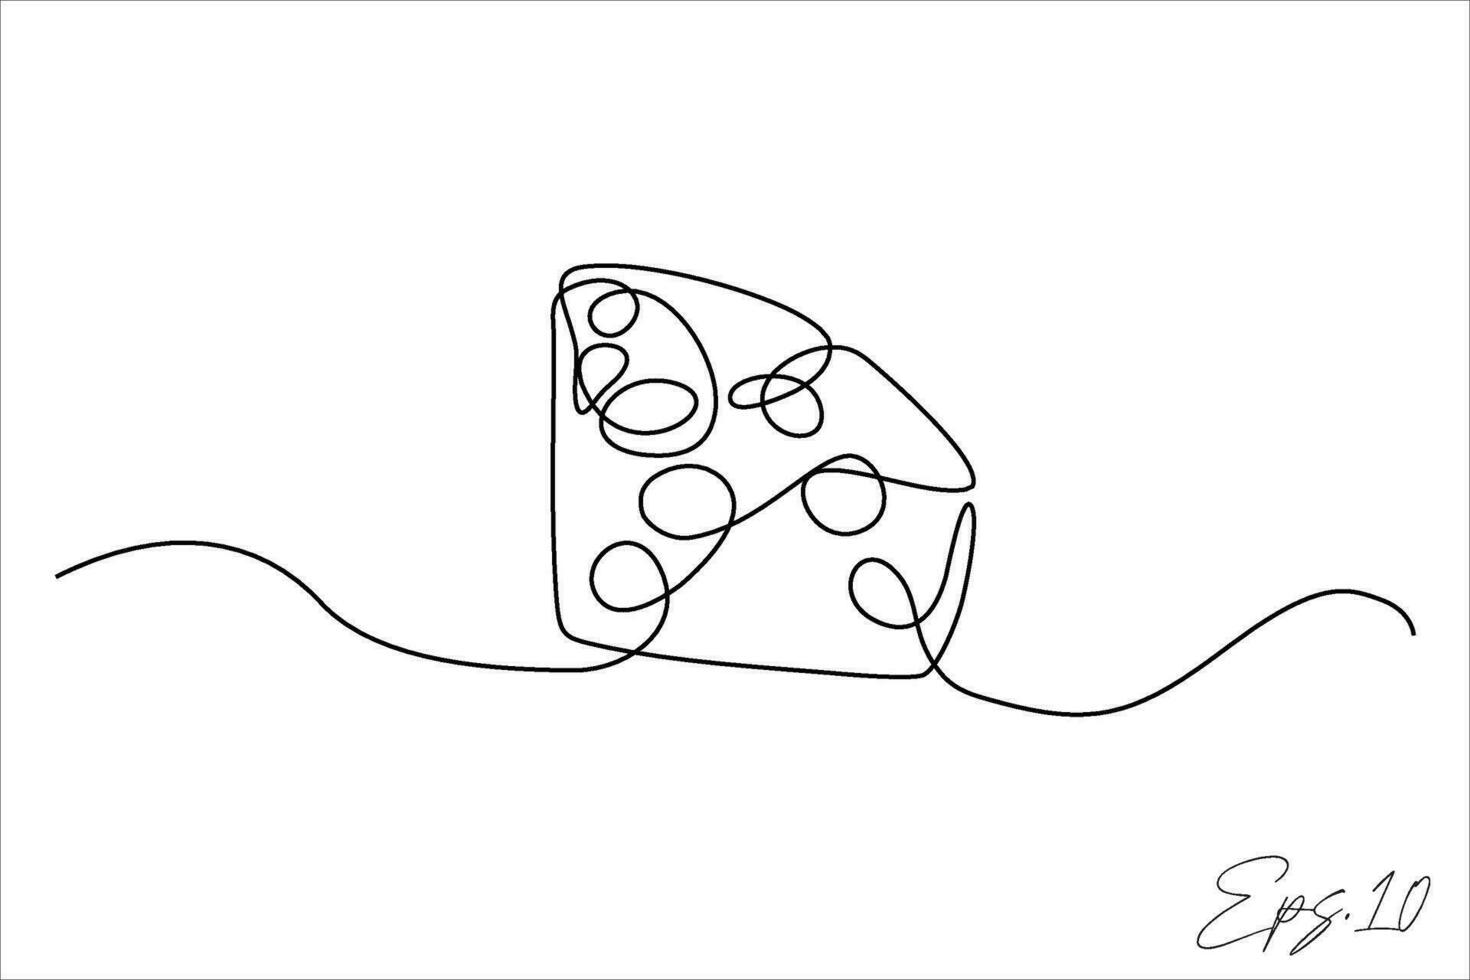 cheese continuous line art drawing vector